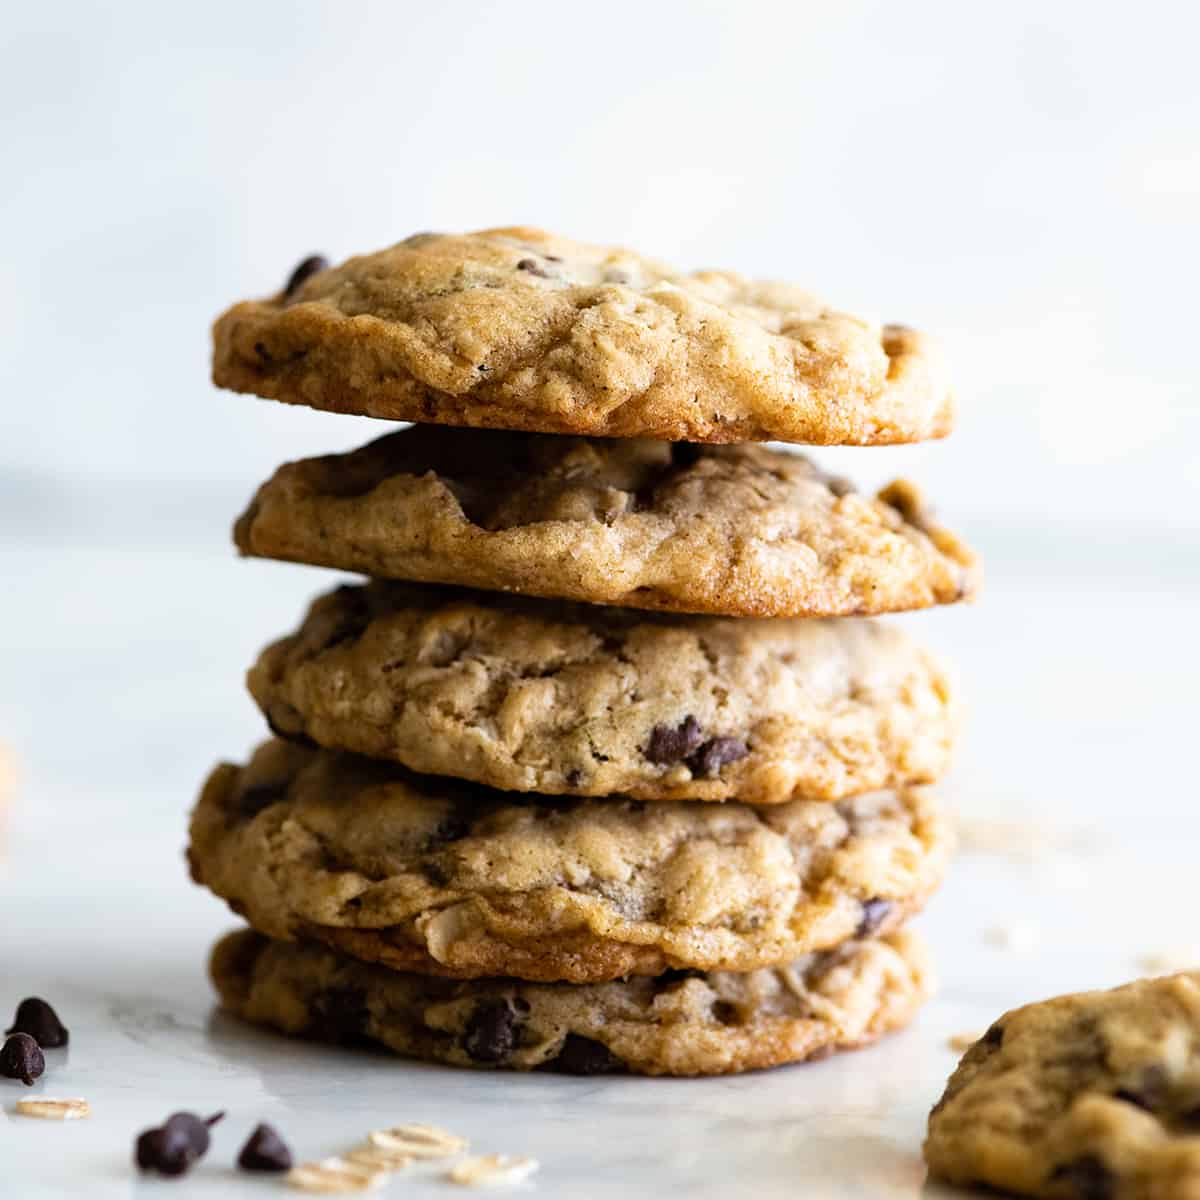  stack of 5 oatmeal cookies with chocolate chips